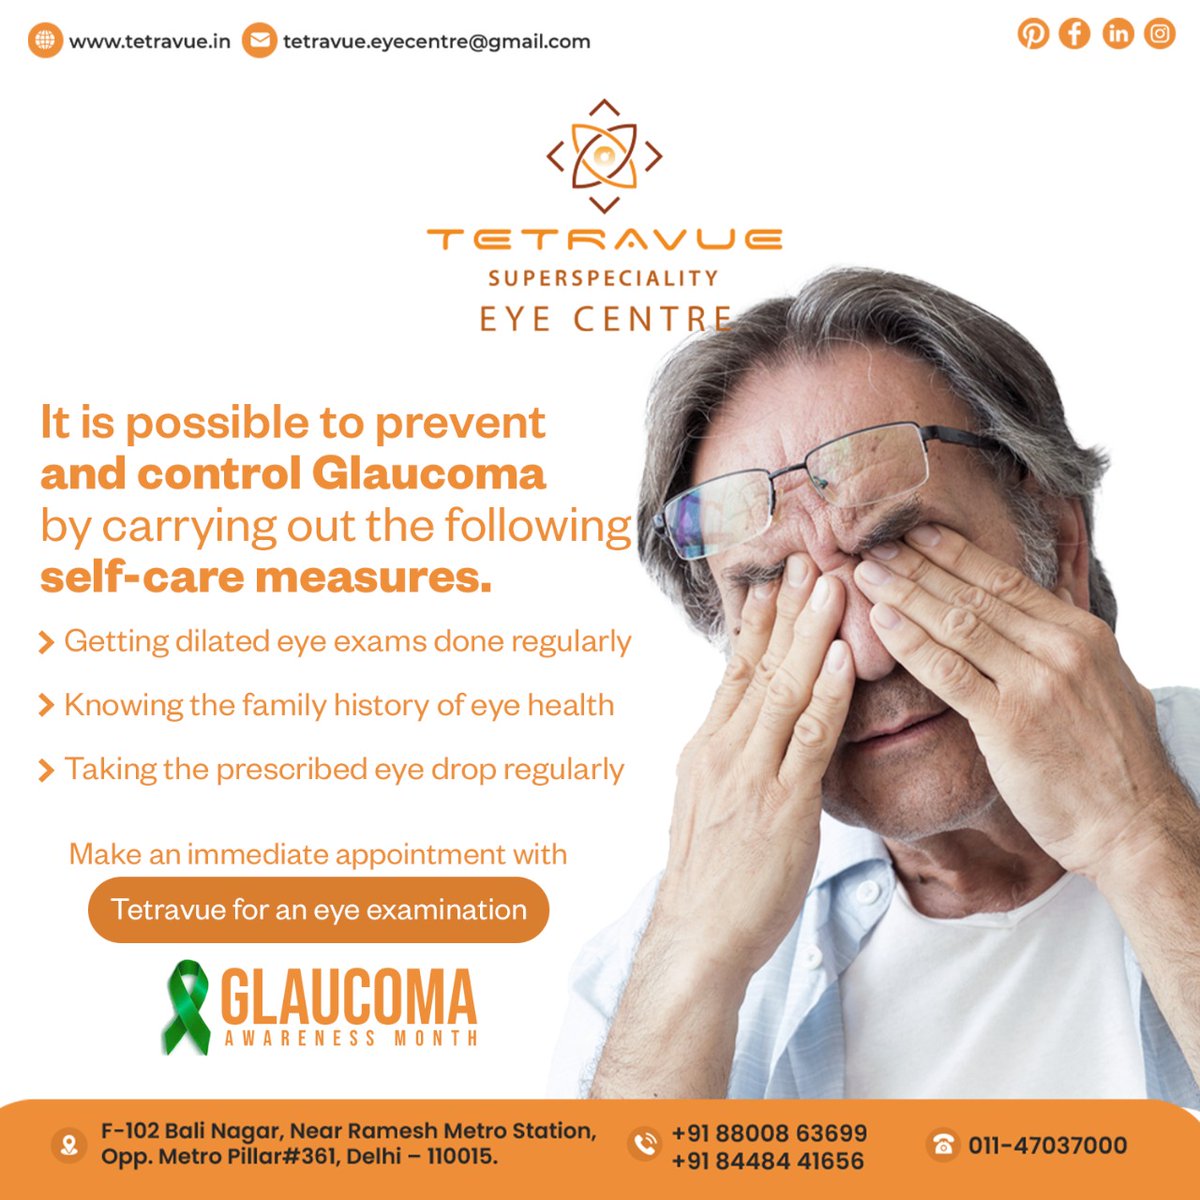 Don't lose sight of the big picture
The best technique for glaucoma prevention is early detection. #GlaucomaAwarenessMonth #TETRAVUE #eyecentre #eyecheckup #eyedoctor #delhiindia #glaucomaawareness #glaucoma #glaucomasurgery #glaucomatreatment #kalamotiya #eyehospital #eyecare